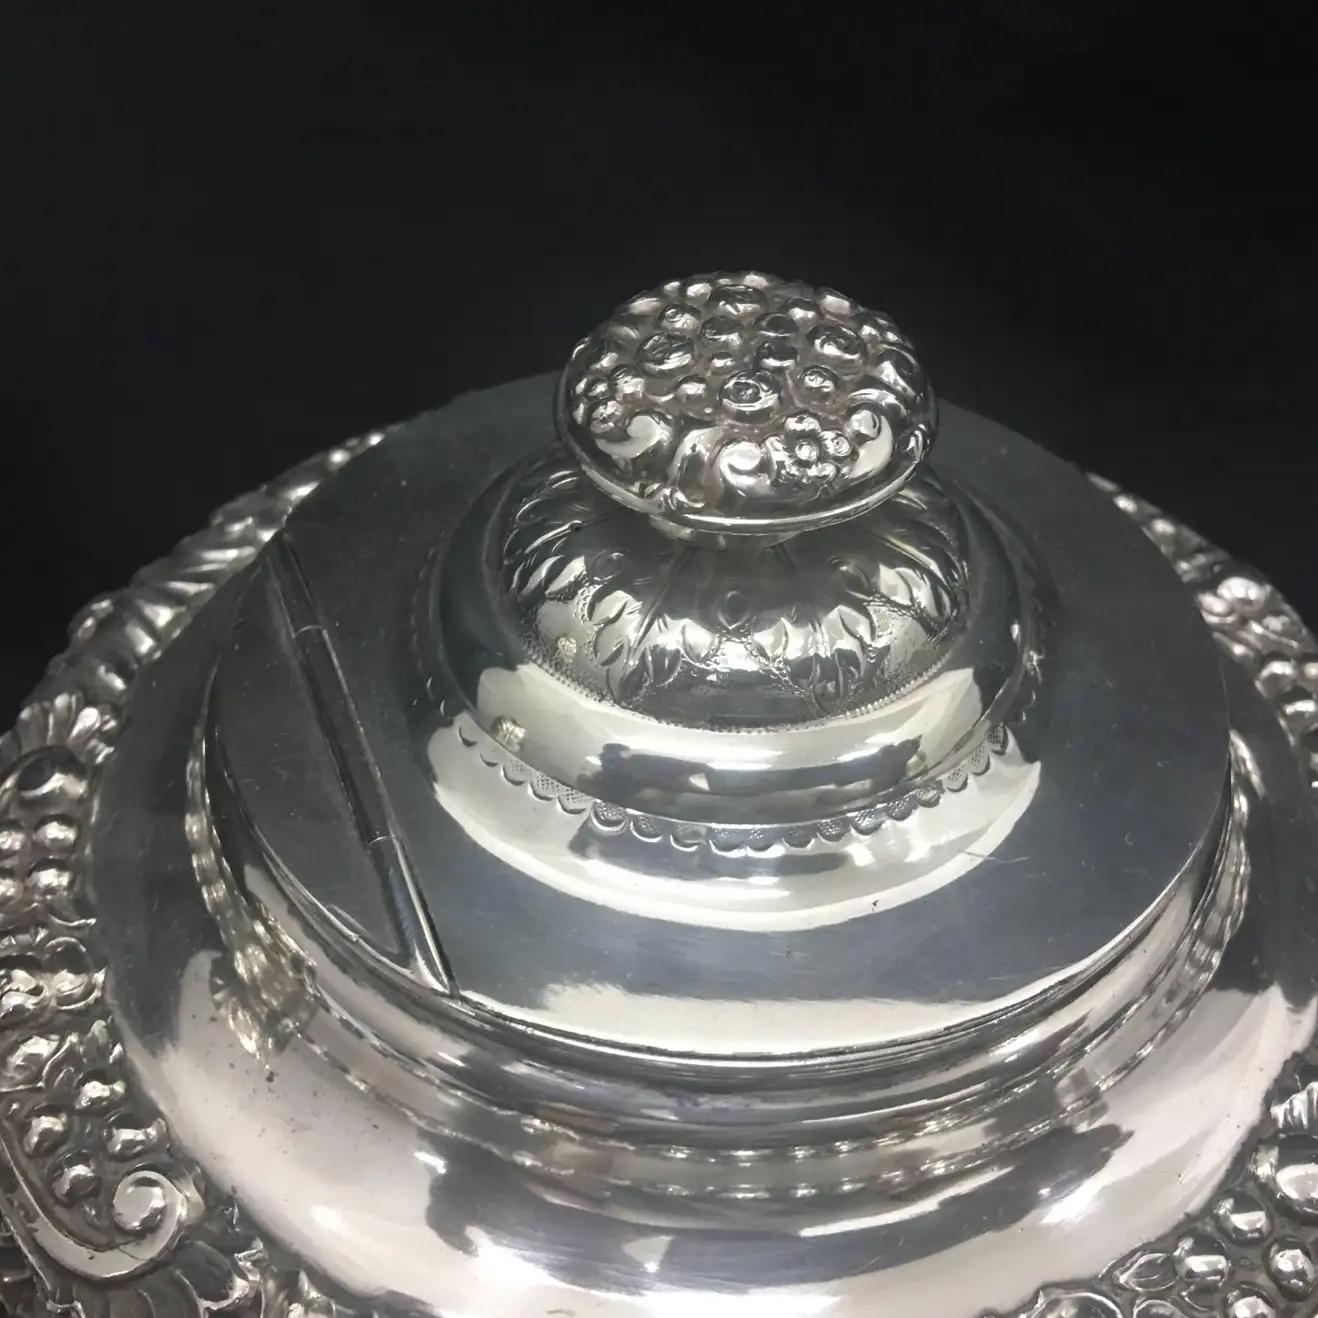 Early Georgian highly ornate Sheffield plate tea set by Watson & Bradbury, made in England in 1818. It's in lovely original conditions.